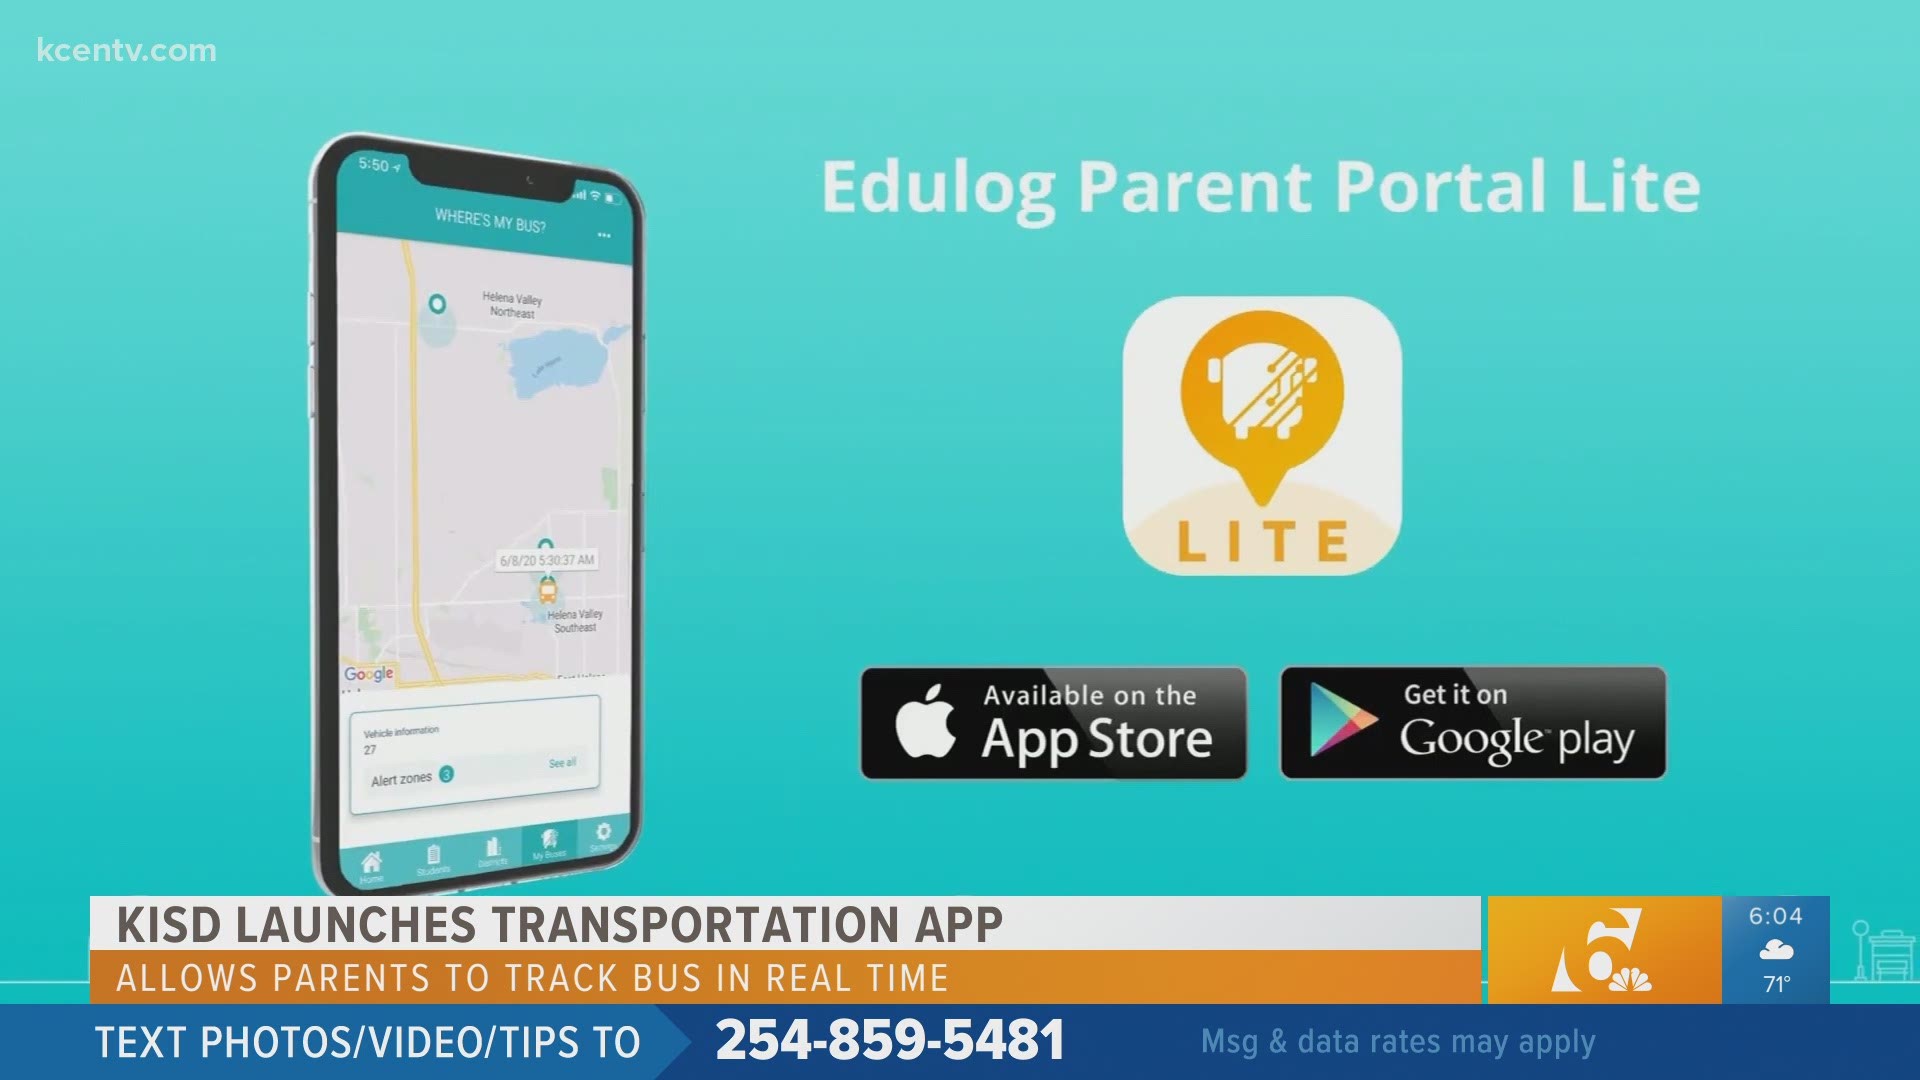 KISD has launched a new transportation app that allows parents to track their child's school bus in real time.